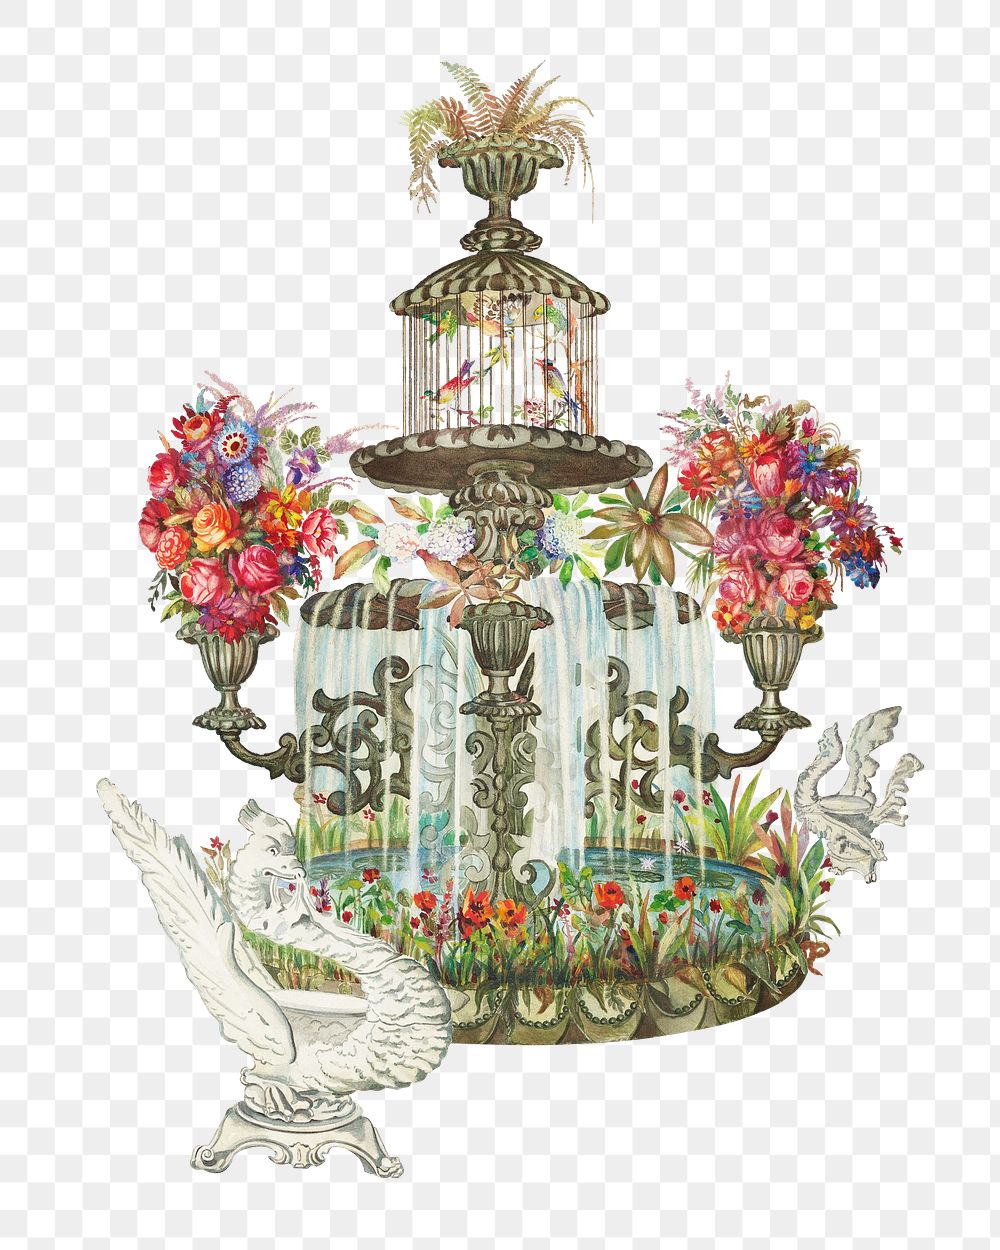 Conservatory Fountain png, vintage garden illustration by Perkins Harnly and Nicholas Zupa, transparent background. Remixed…